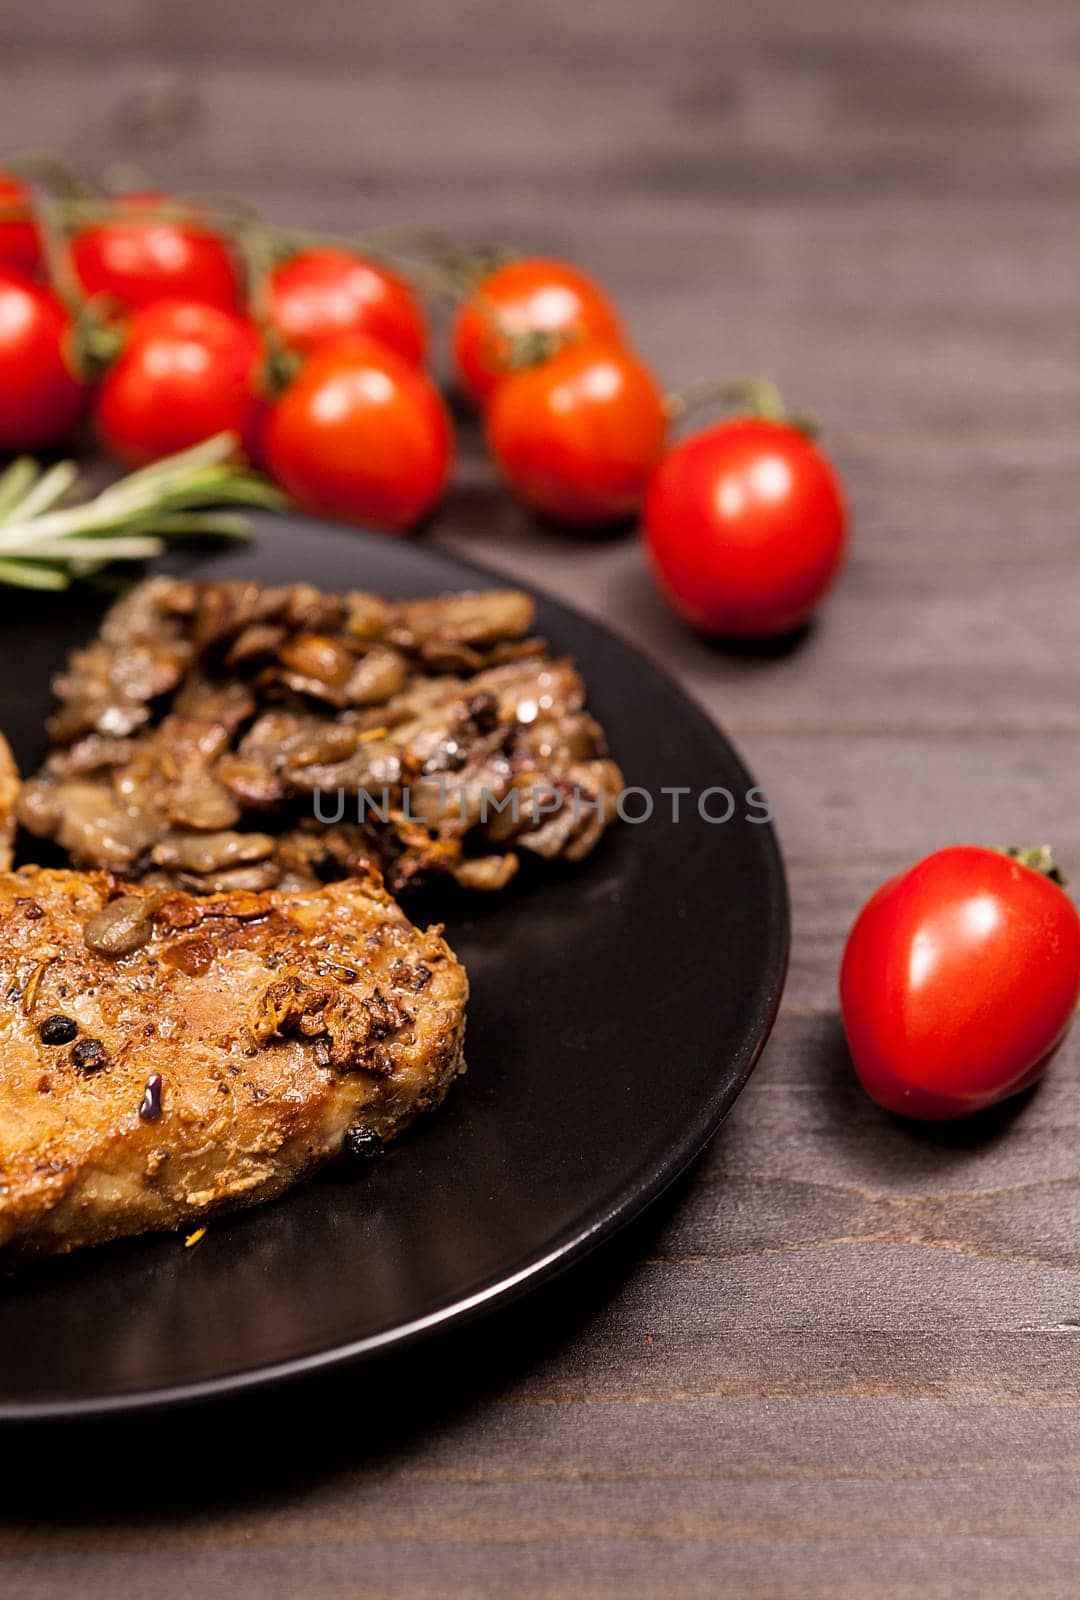 Roasted Pork steak in black plate with grilled mushrooms, oregano cherry tomatoes and bean paste on a wooden table